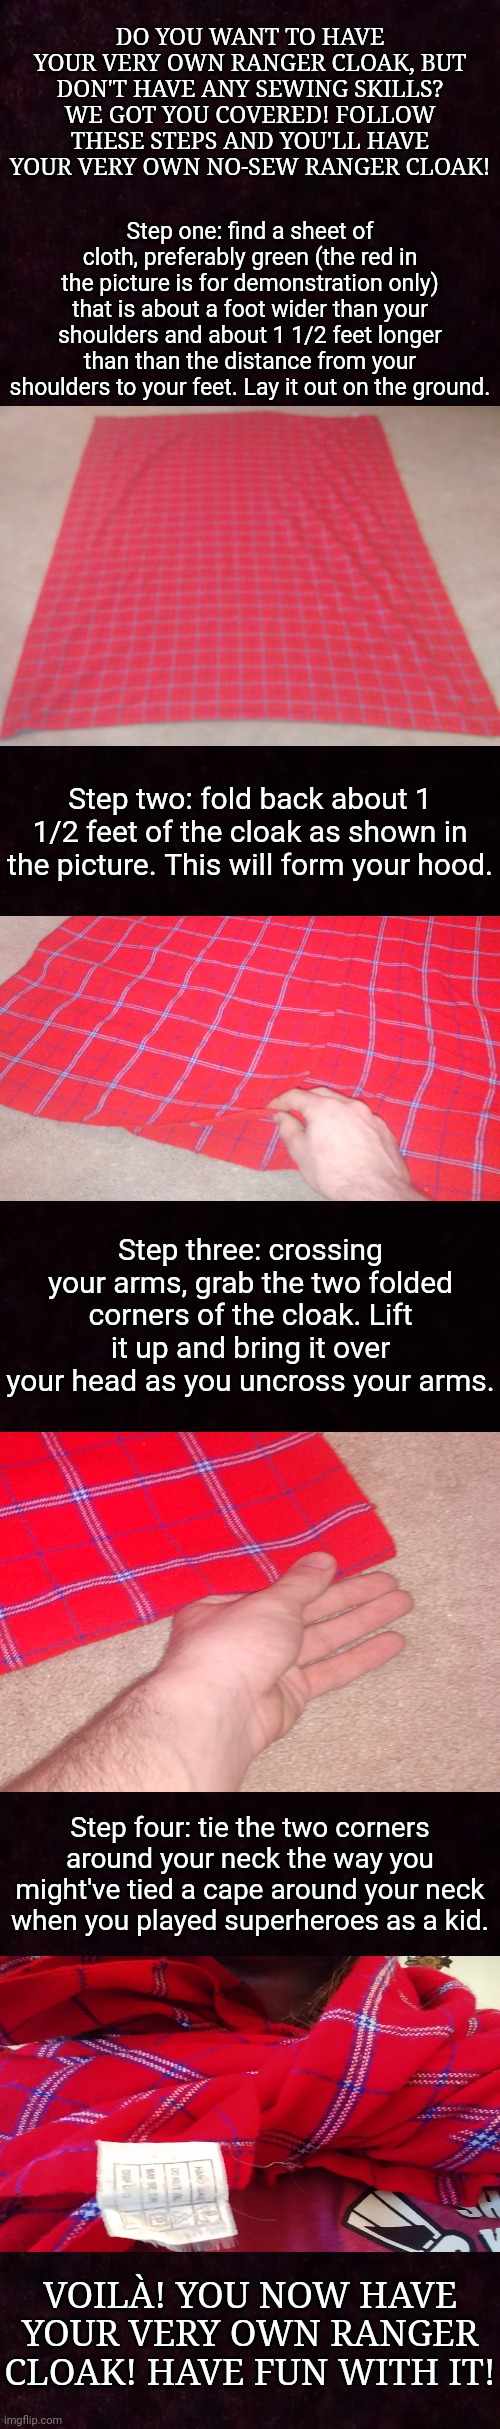 DO YOU WANT TO HAVE YOUR VERY OWN RANGER CLOAK, BUT DON'T HAVE ANY SEWING SKILLS? WE GOT YOU COVERED! FOLLOW THESE STEPS AND YOU'LL HAVE YOUR VERY OWN NO-SEW RANGER CLOAK! Step one: find a sheet of cloth, preferably green (the red in the picture is for demonstration only) that is about a foot wider than your shoulders and about 1 1/2 feet longer than than the distance from your shoulders to your feet. Lay it out on the ground. Step two: fold back about 1 1/2 feet of the cloak as shown in the picture. This will form your hood. Step three: crossing your arms, grab the two folded corners of the cloak. Lift it up and bring it over your head as you uncross your arms. Step four: tie the two corners around your neck the way you might've tied a cape around your neck when you played superheroes as a kid. VOILÀ! YOU NOW HAVE YOUR VERY OWN RANGER CLOAK! HAVE FUN WITH IT! | image tagged in rangers,ranger's apprentice,cloak,diy | made w/ Imgflip meme maker